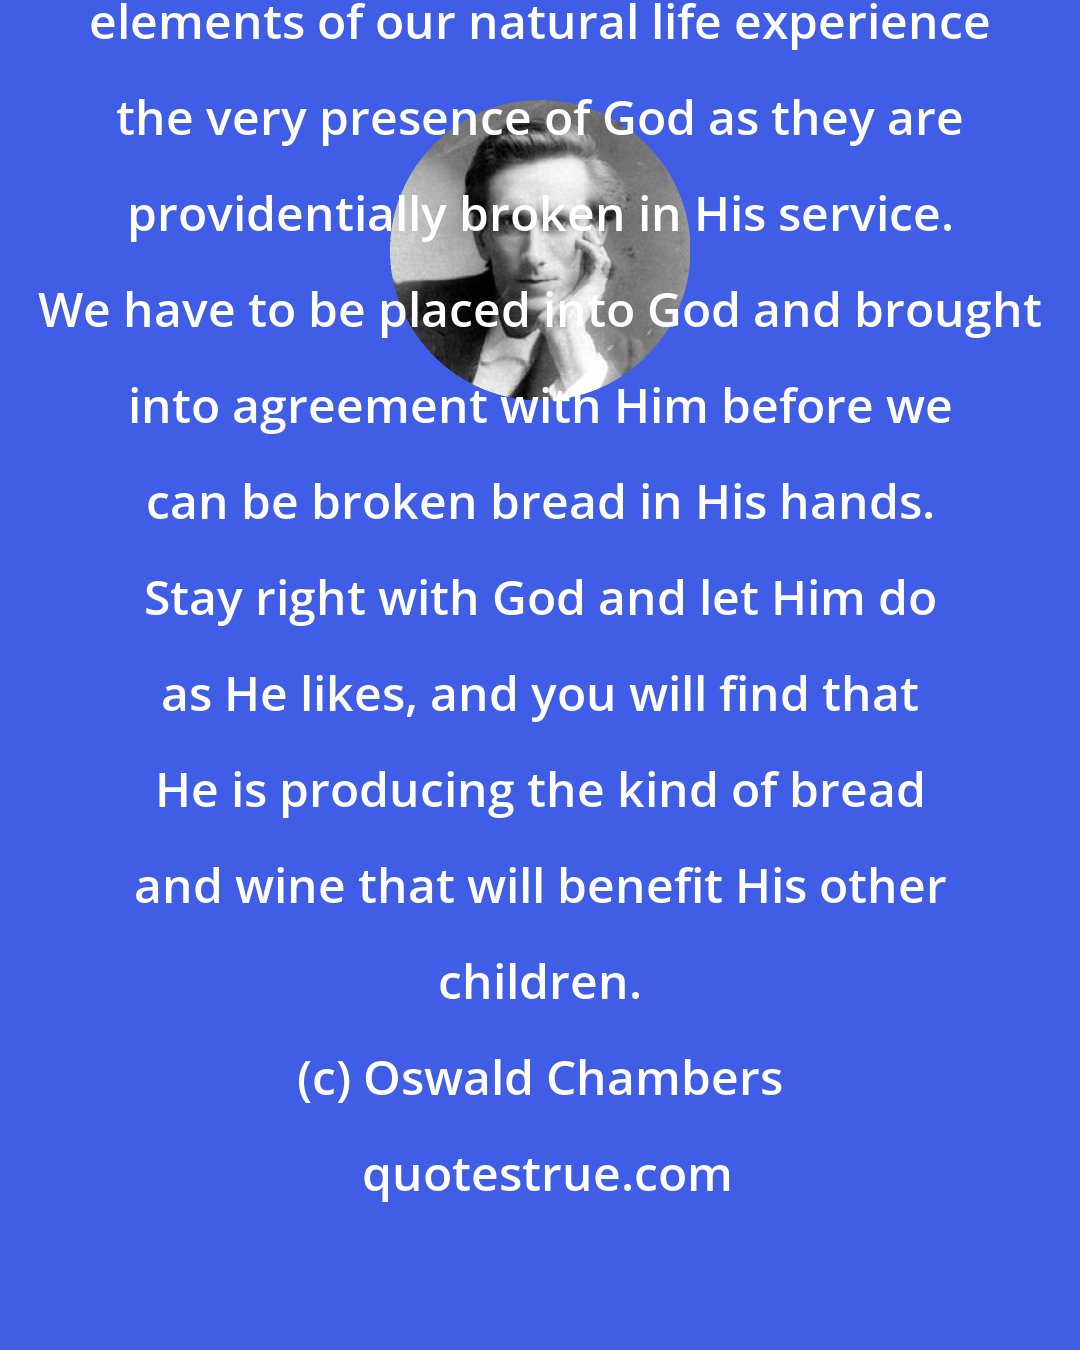 Oswald Chambers: To be a holy person means that the elements of our natural life experience the very presence of God as they are providentially broken in His service. We have to be placed into God and brought into agreement with Him before we can be broken bread in His hands. Stay right with God and let Him do as He likes, and you will find that He is producing the kind of bread and wine that will benefit His other children.